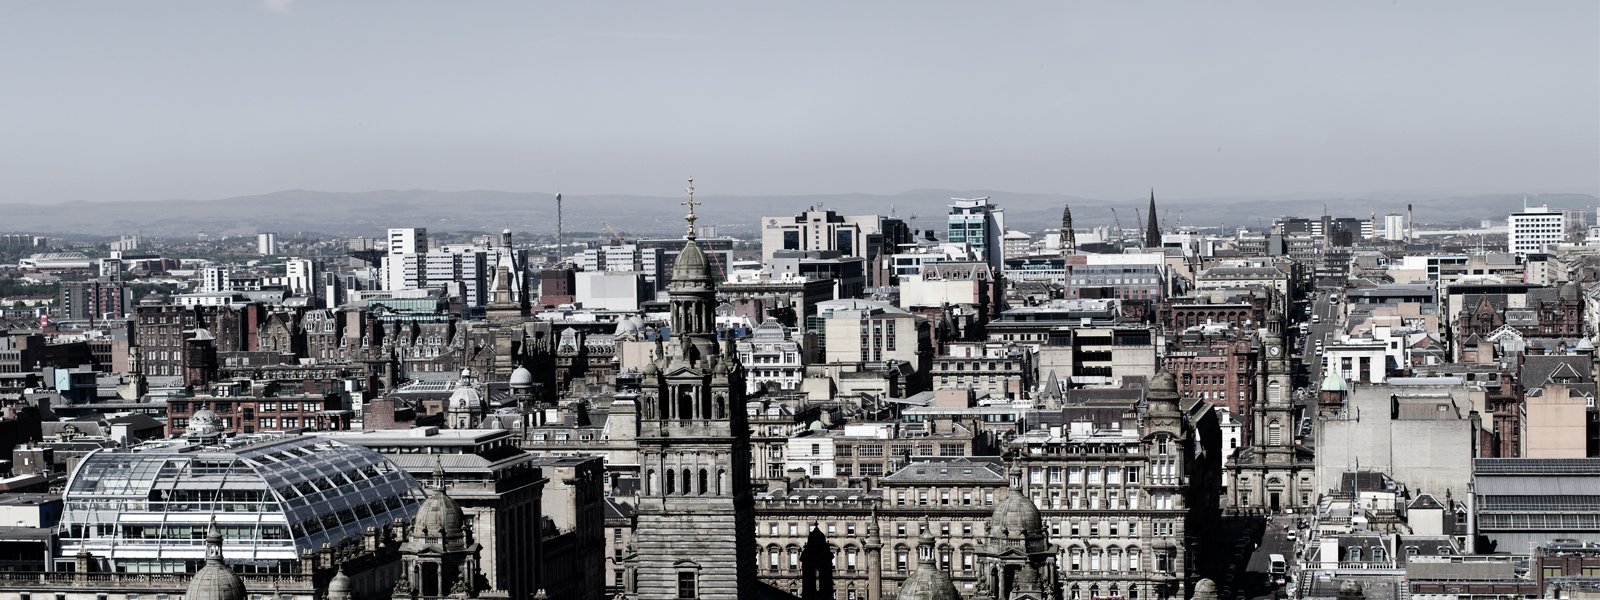 View overlooking Glasgow from the top of Livingston Tower